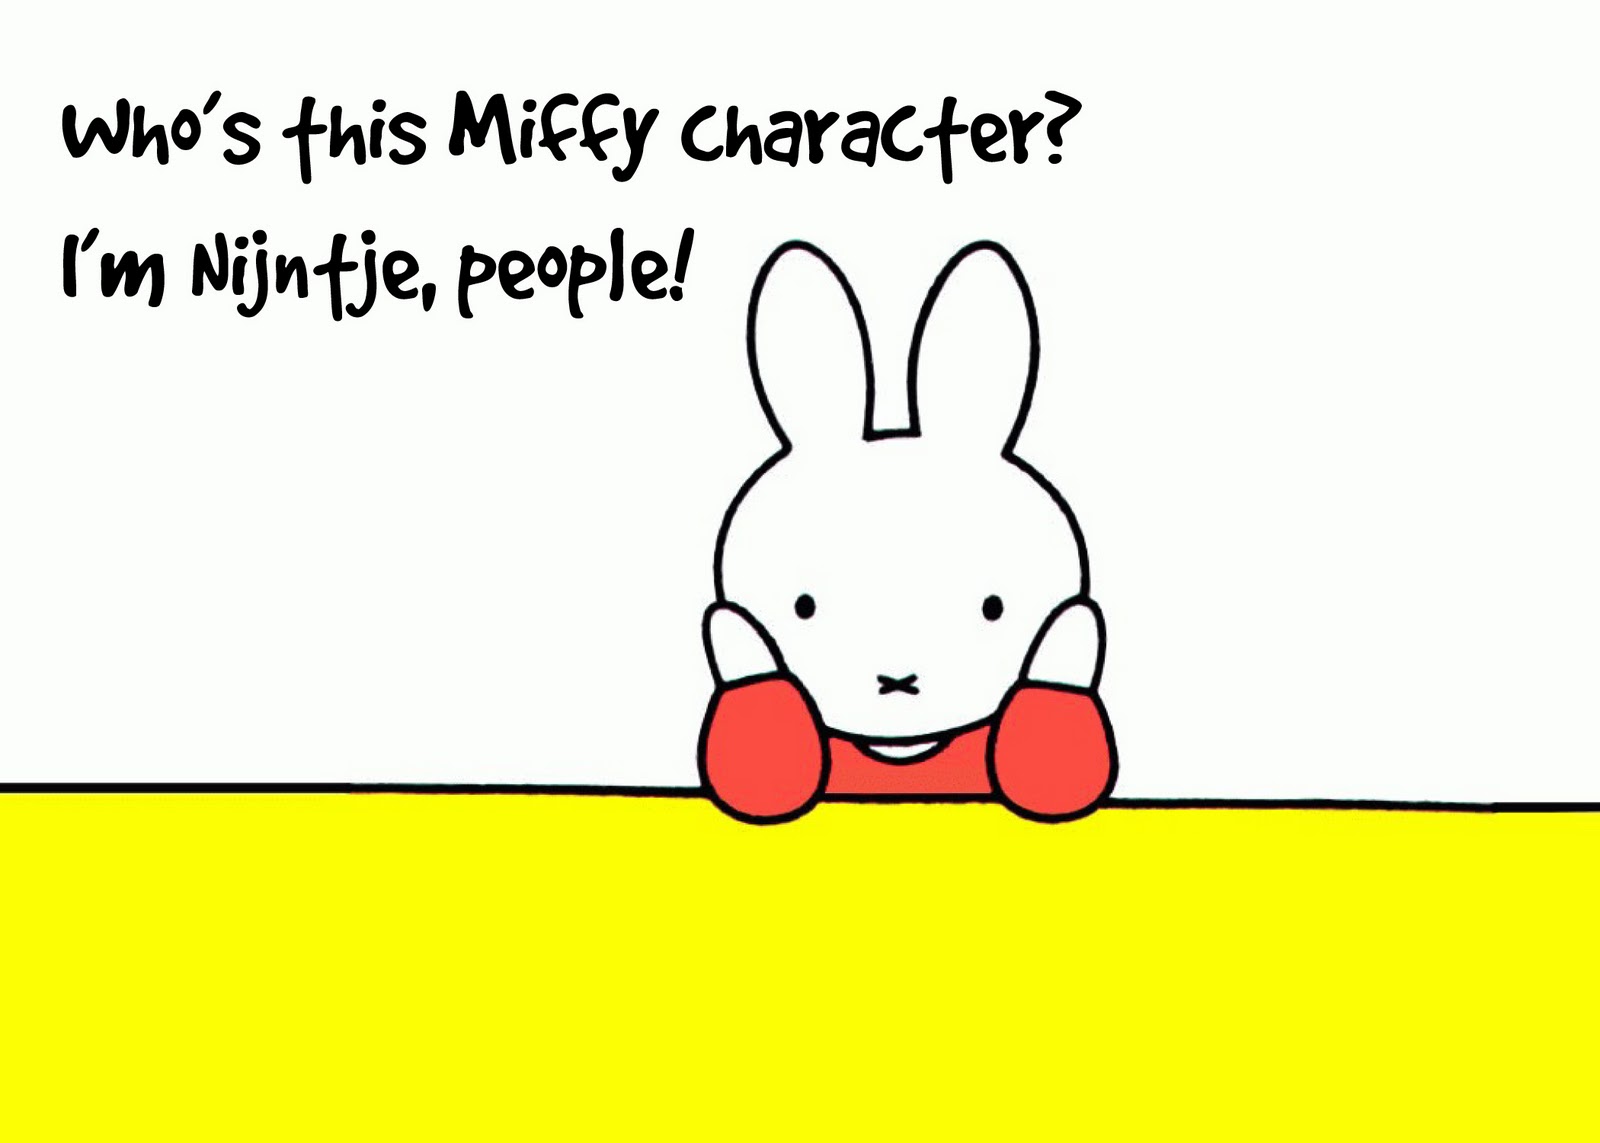 The housewife: No, Miffy is not Japanese.